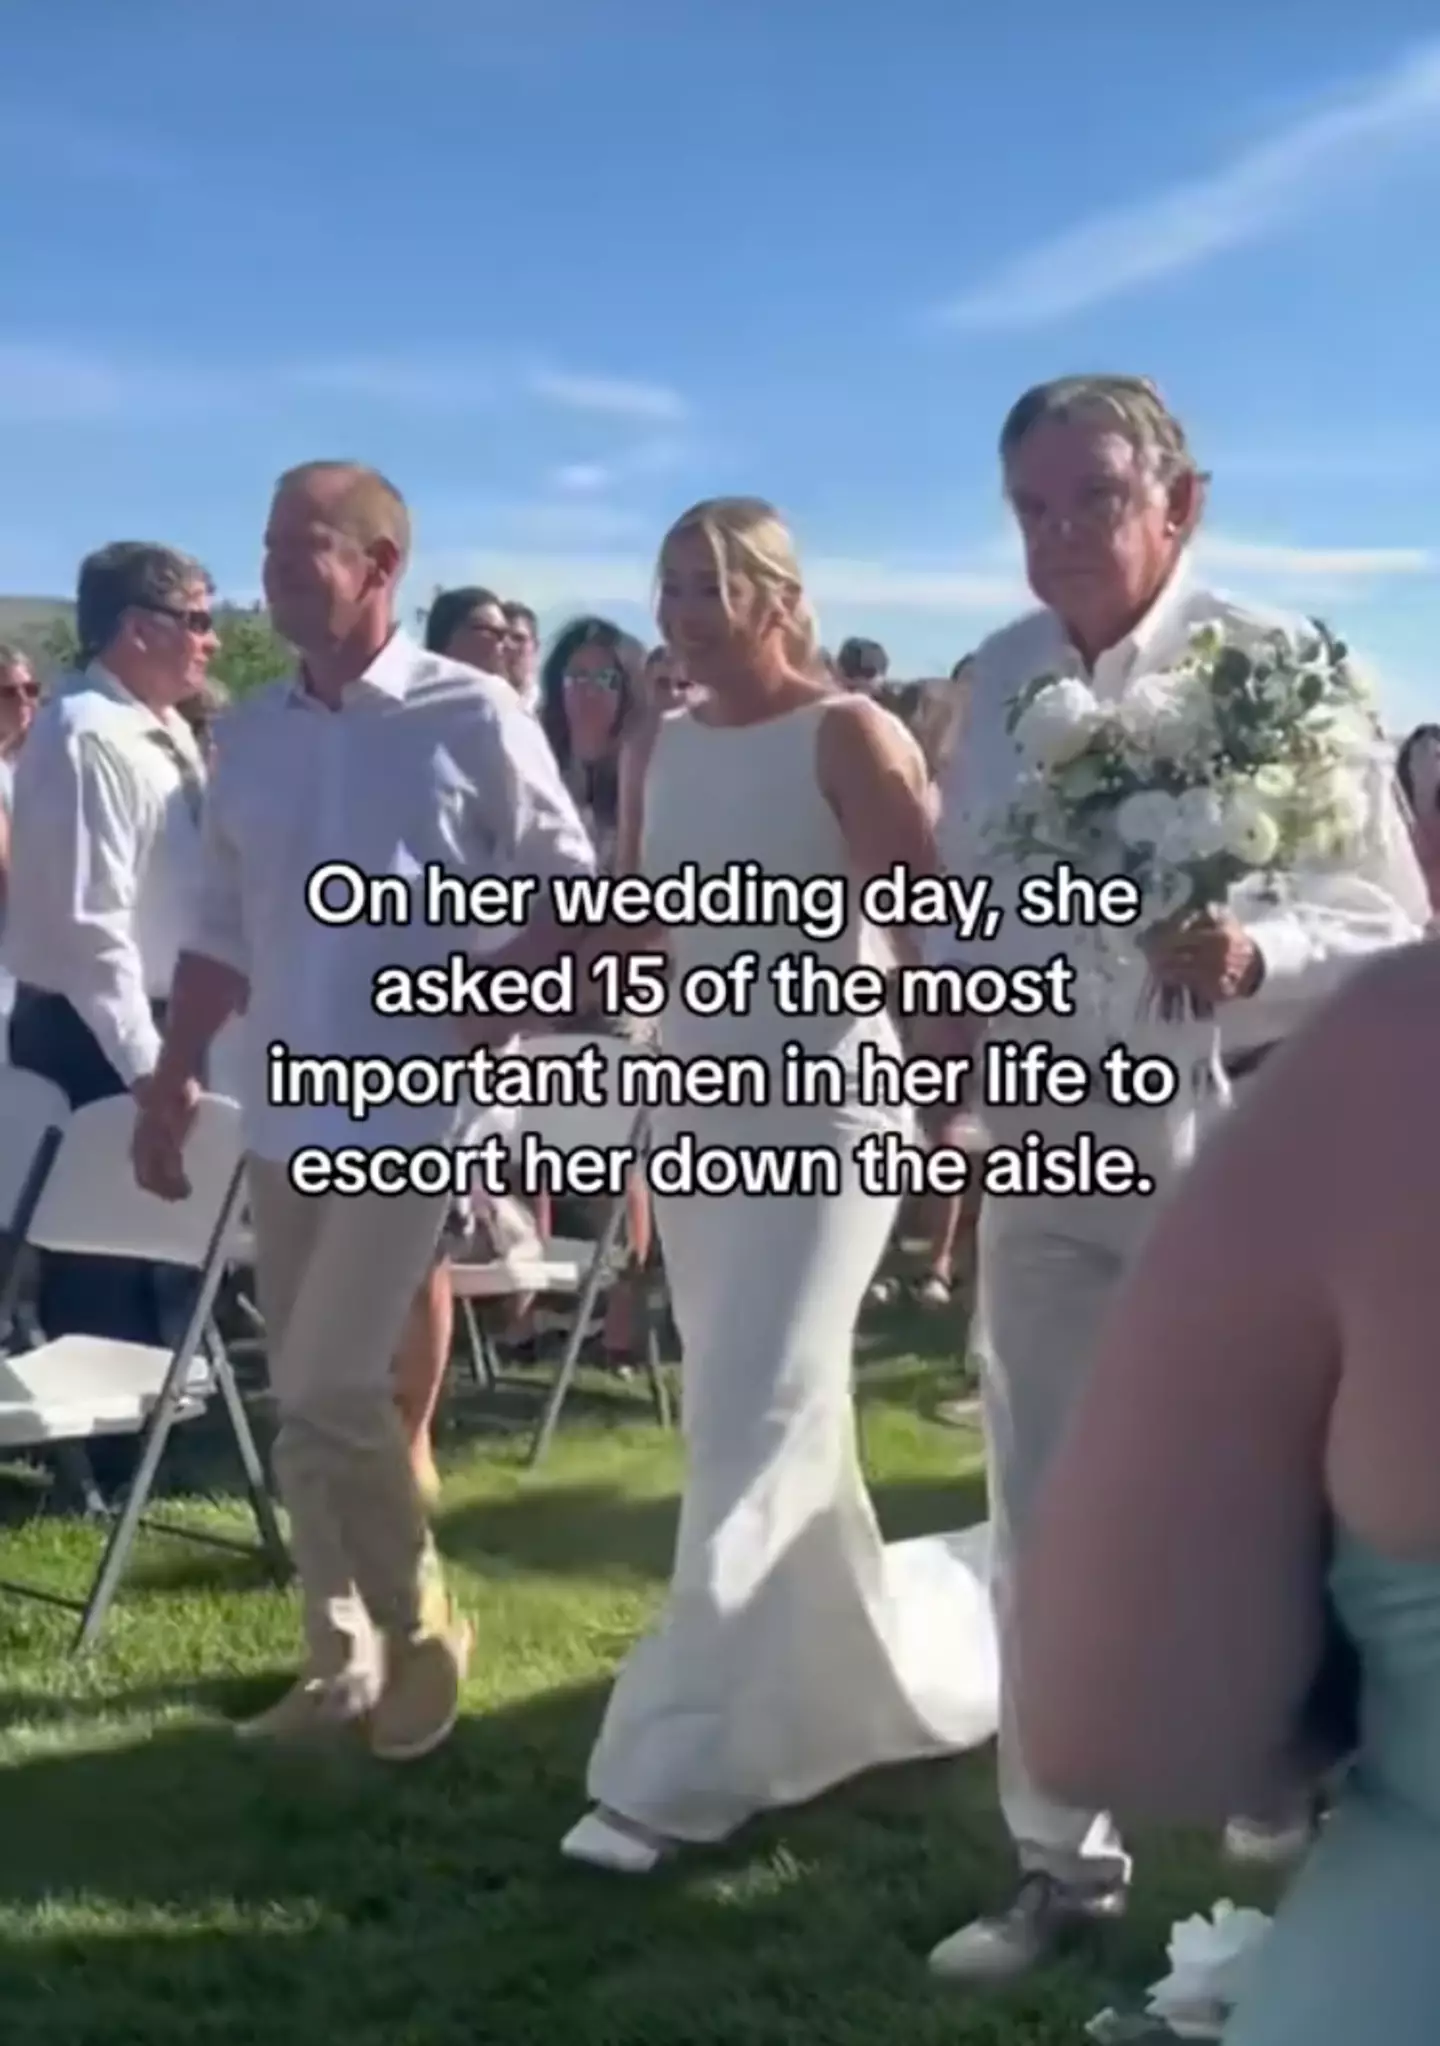 Ivy was walked down the aisle by 15 different men.